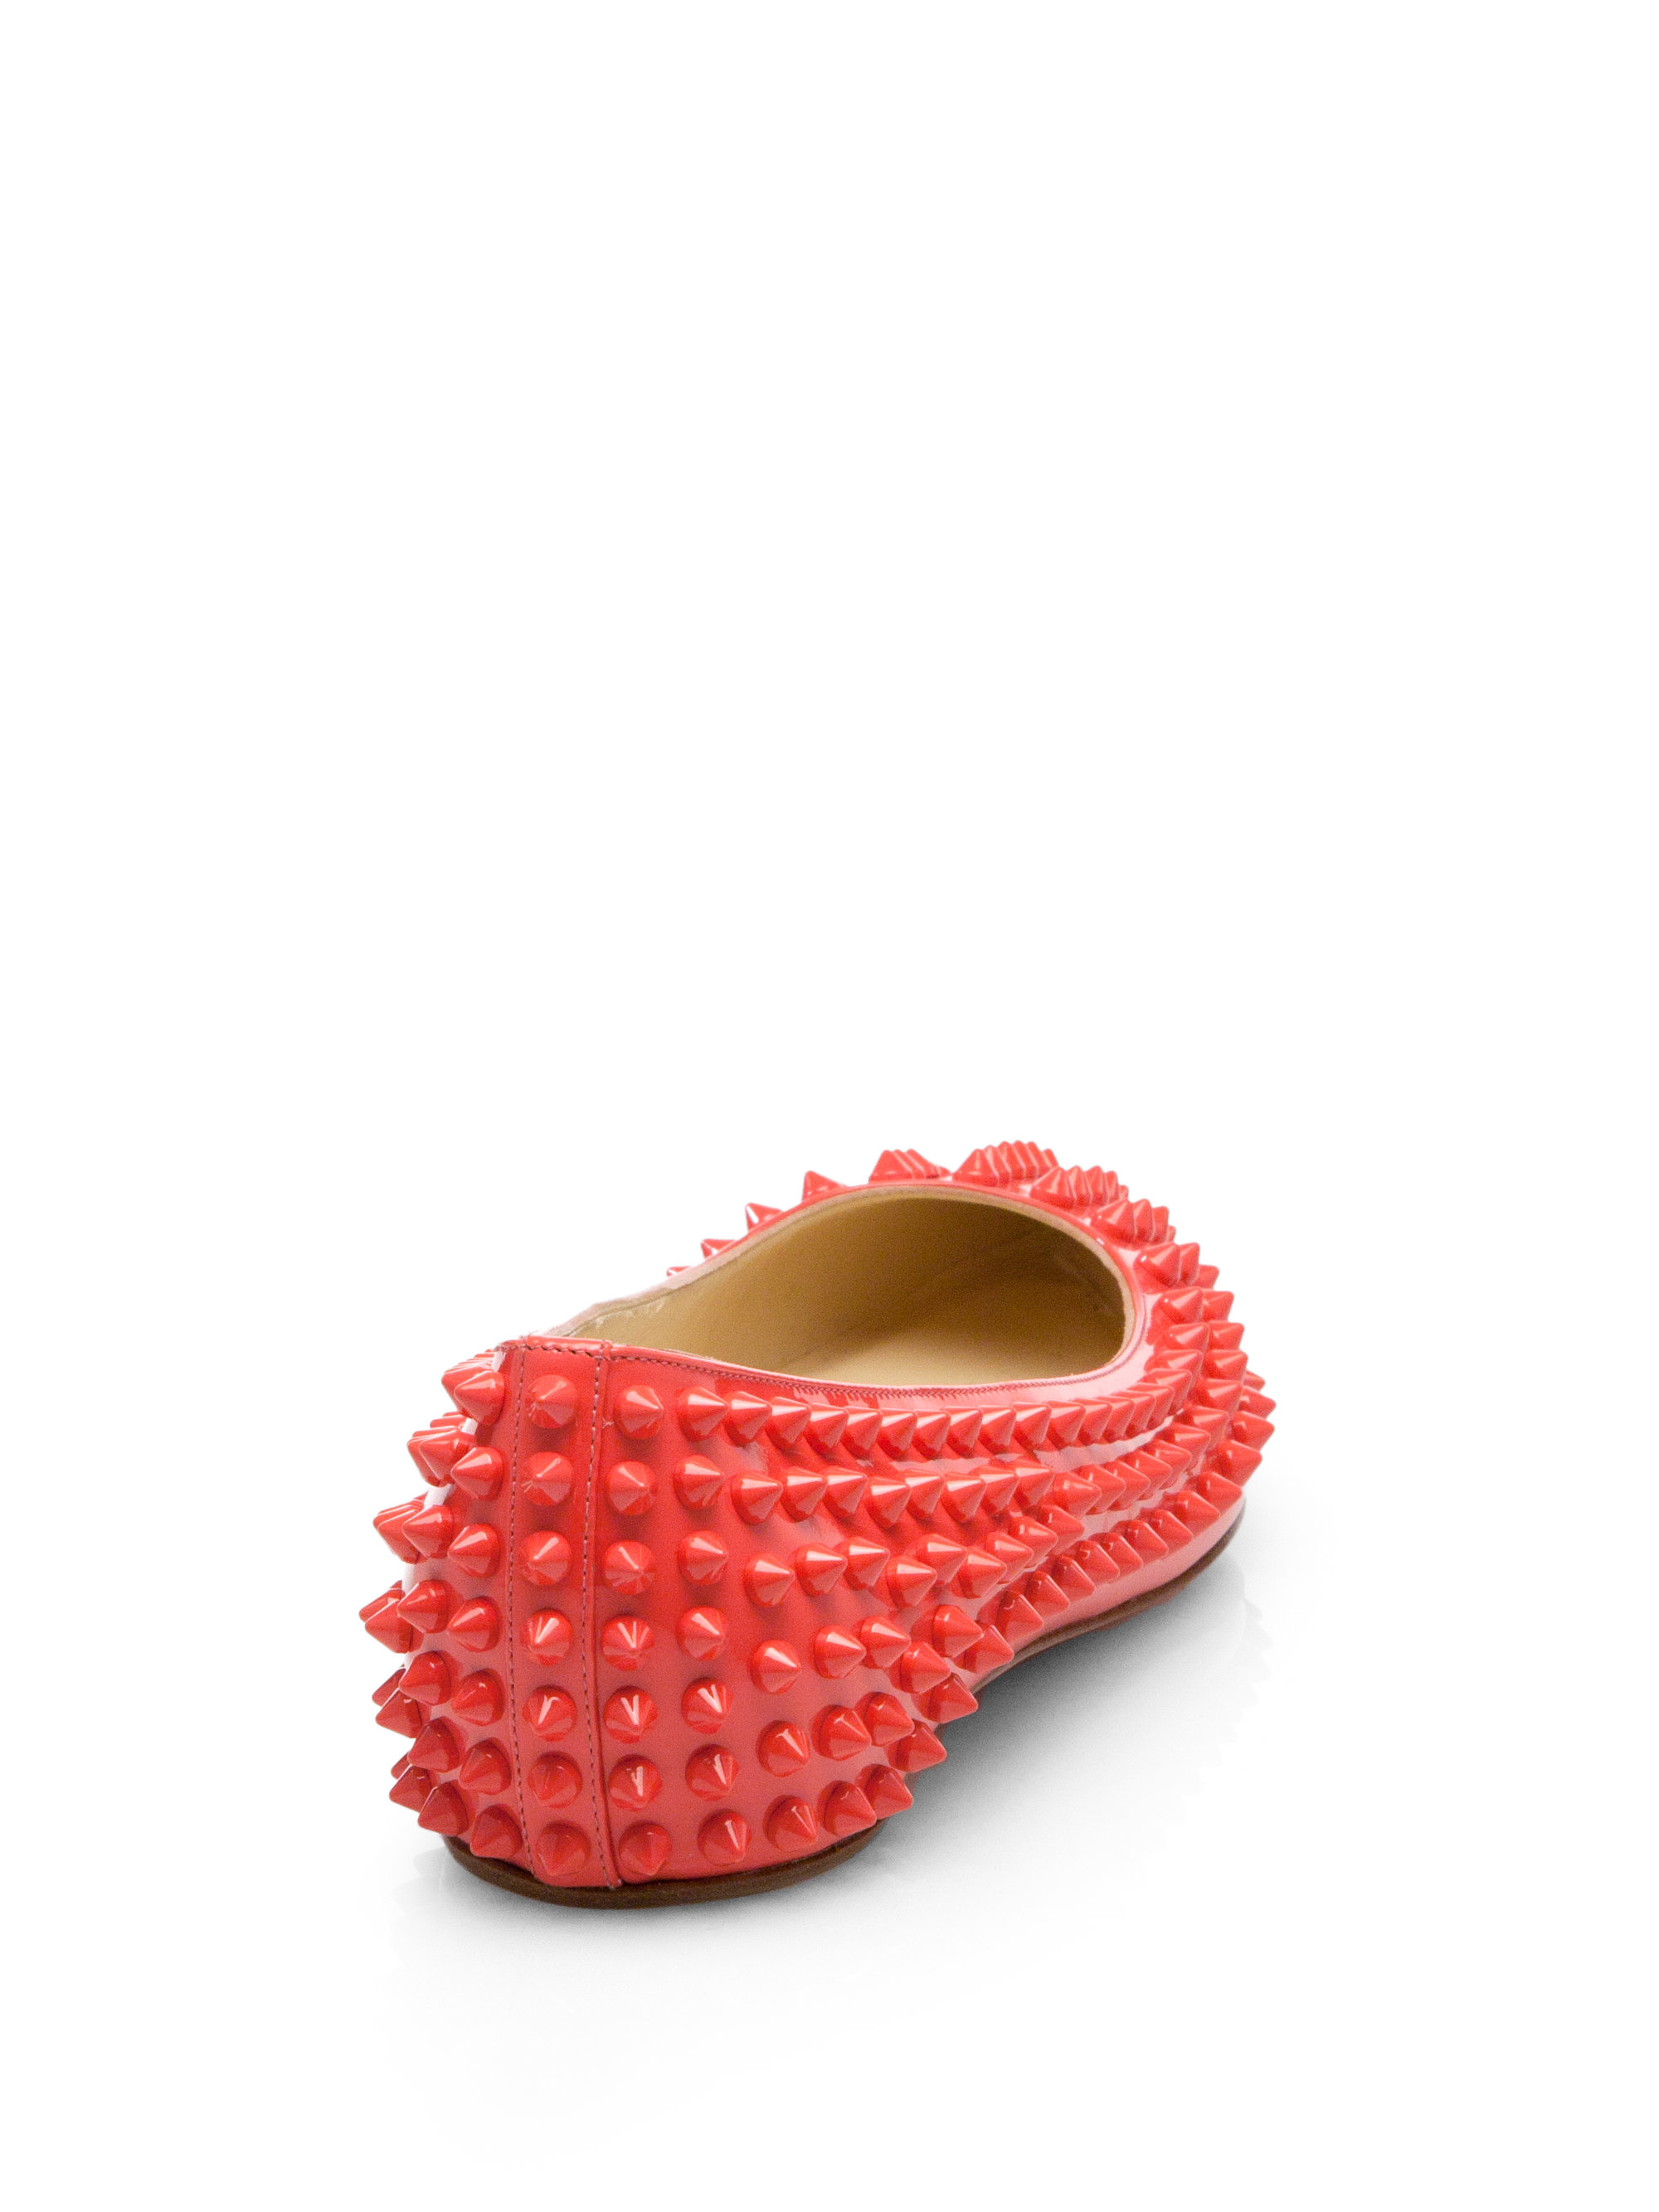 Christian louboutin Pigalle Spiked Patent Leather Flats in Red ...  